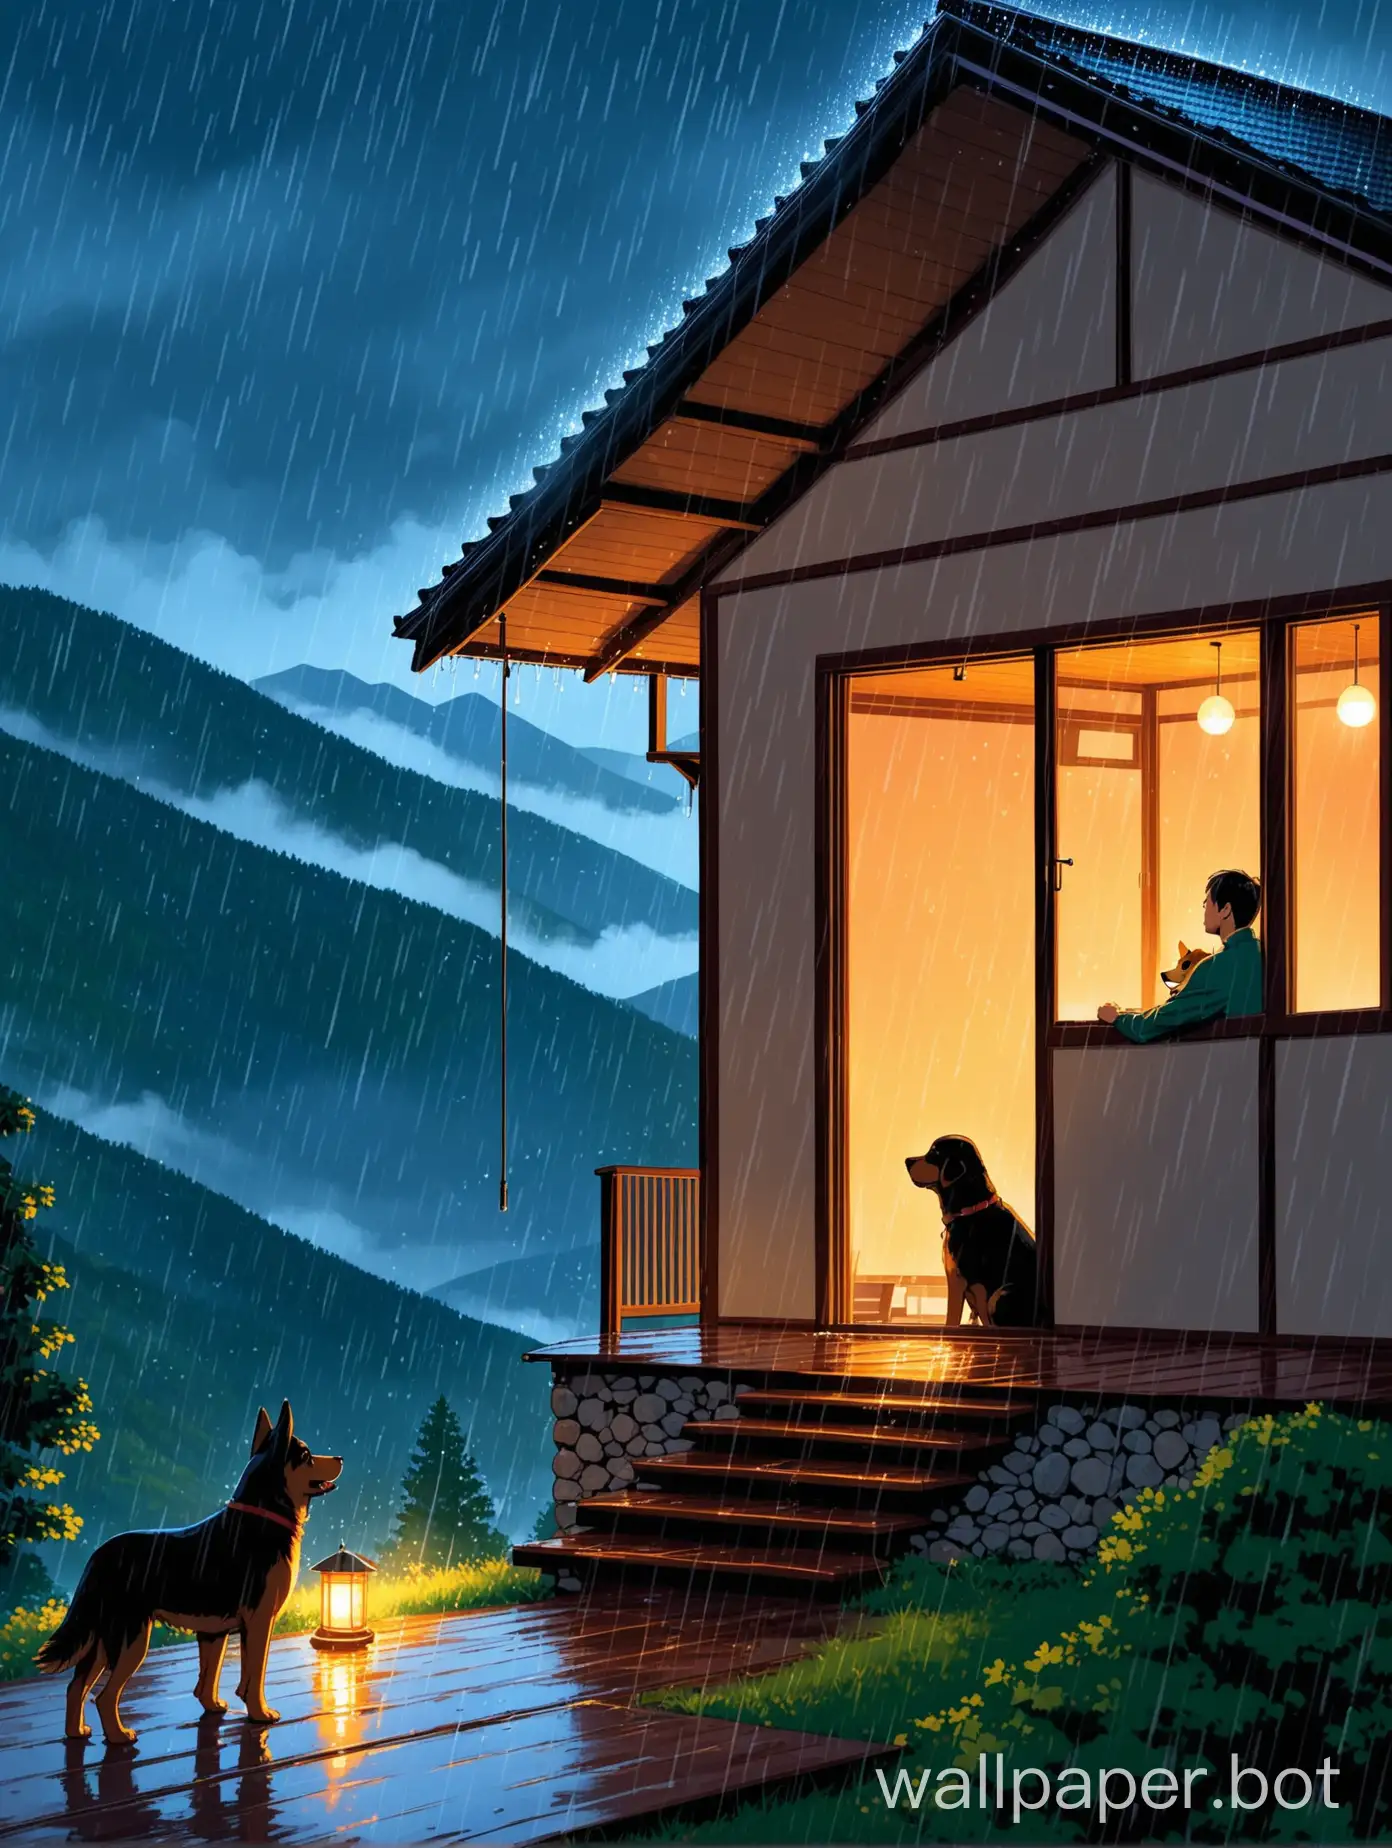 It is raining in a house a dog and a man are enjoying the mountain in the evening